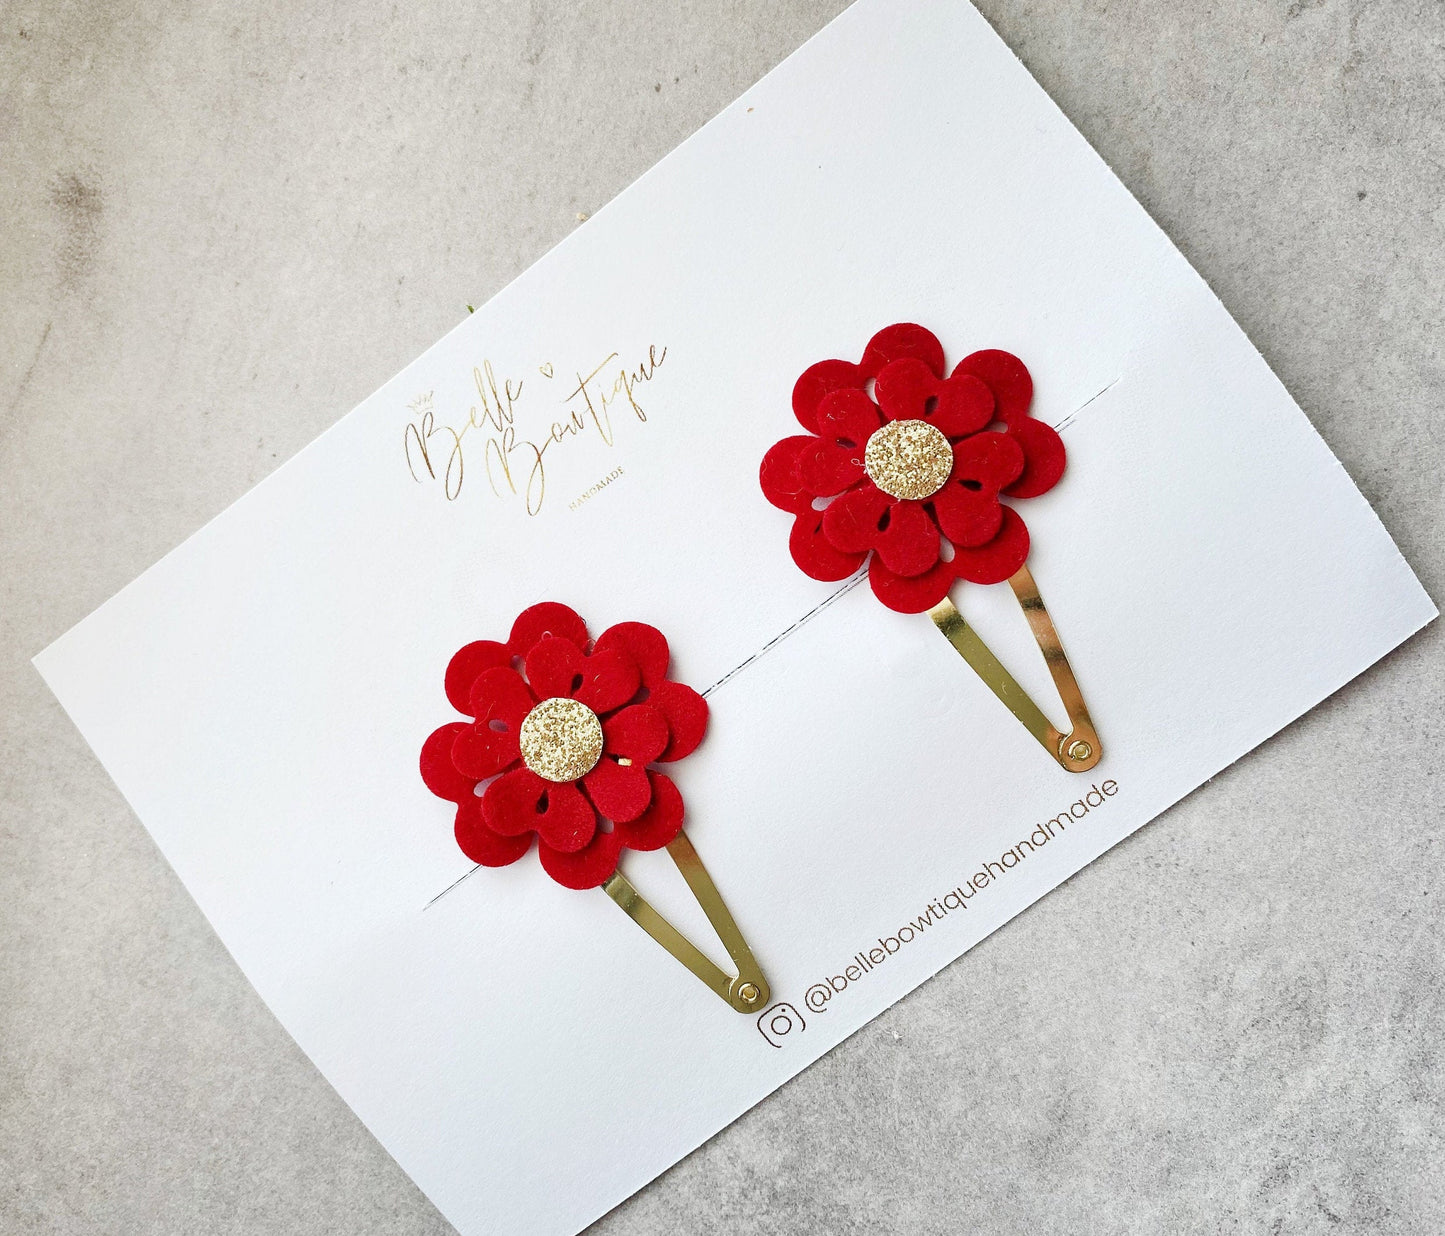 Fringe Clip - Red Gold Flower Hair Clips - Pigtail Clips - Small Clip - Baby Gift - Hair Clips - Girls Hair Accessories - School Clips Pair